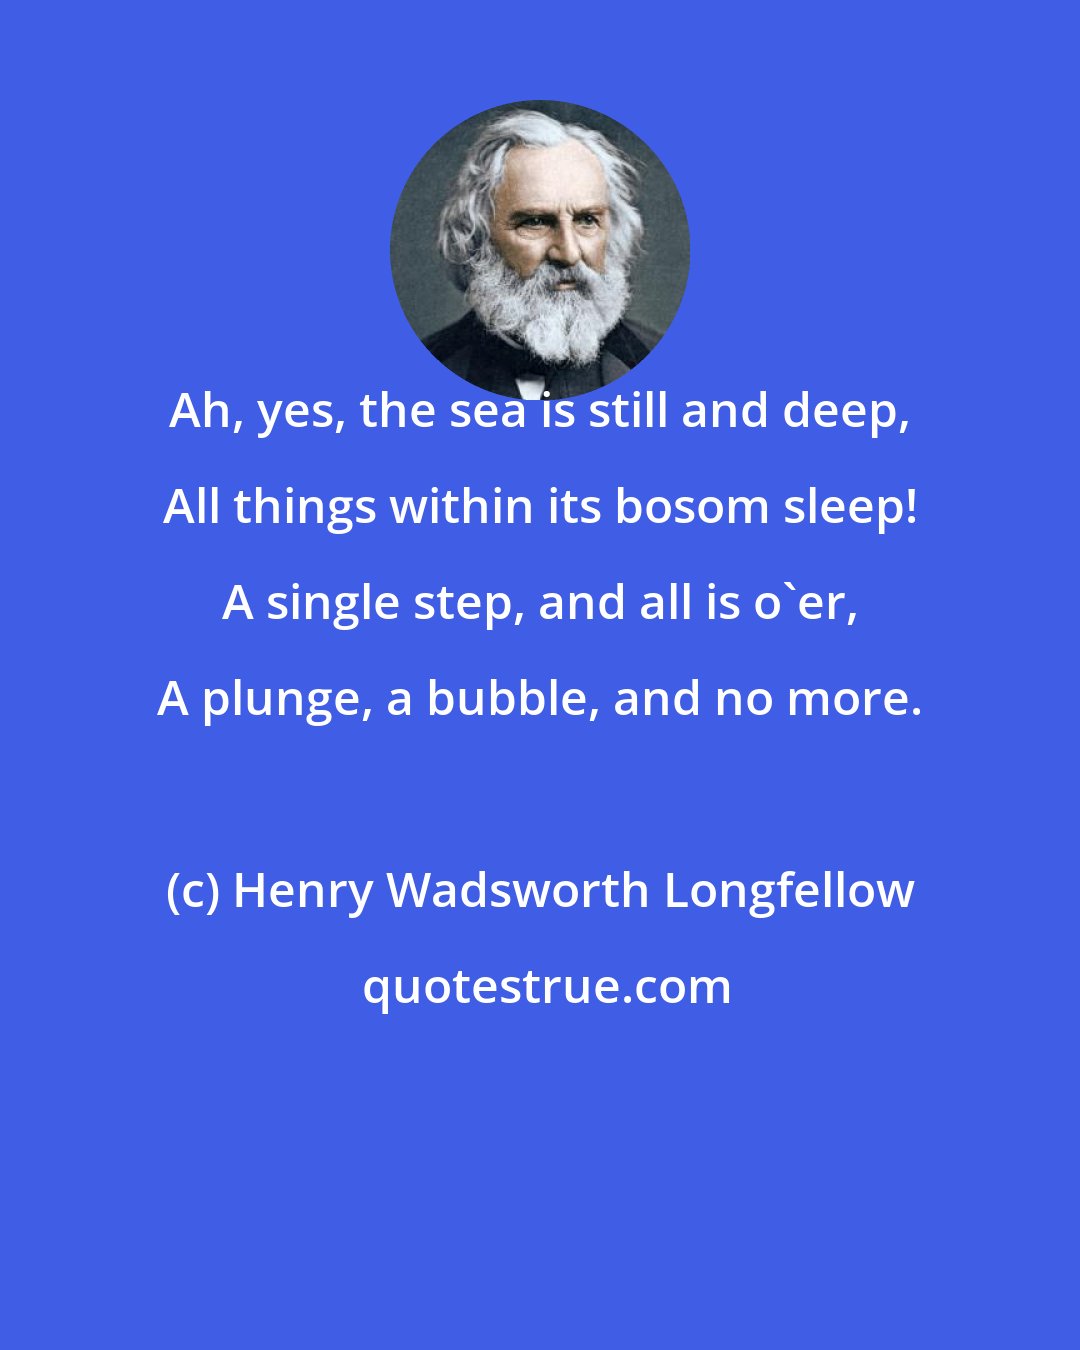 Henry Wadsworth Longfellow: Ah, yes, the sea is still and deep, All things within its bosom sleep! A single step, and all is o'er, A plunge, a bubble, and no more.